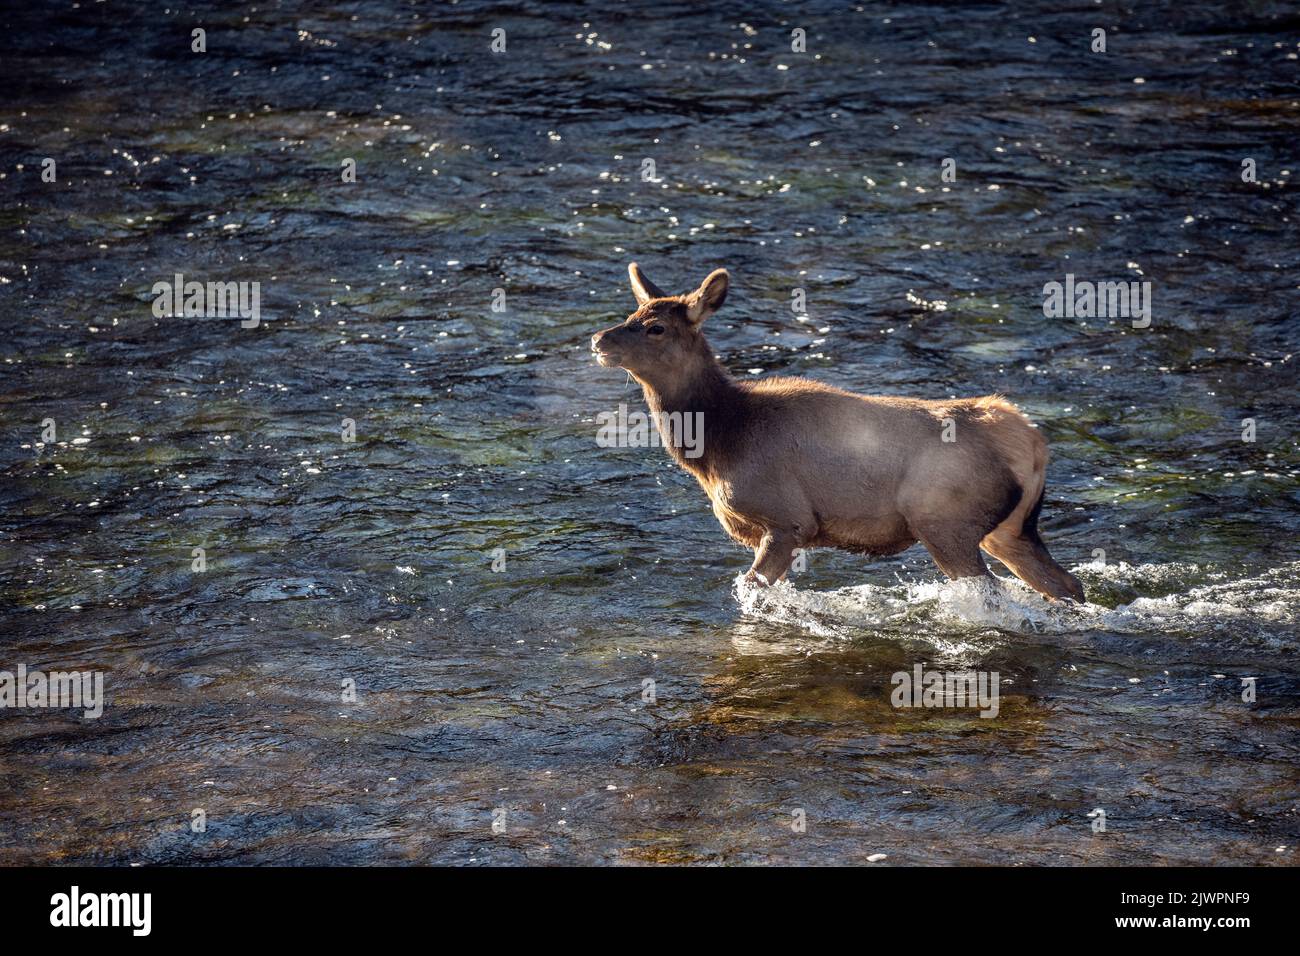 WY05033-00....WYOMING - Junge Elche im Fire Hole River, Yellowstone National Park. Stockfoto